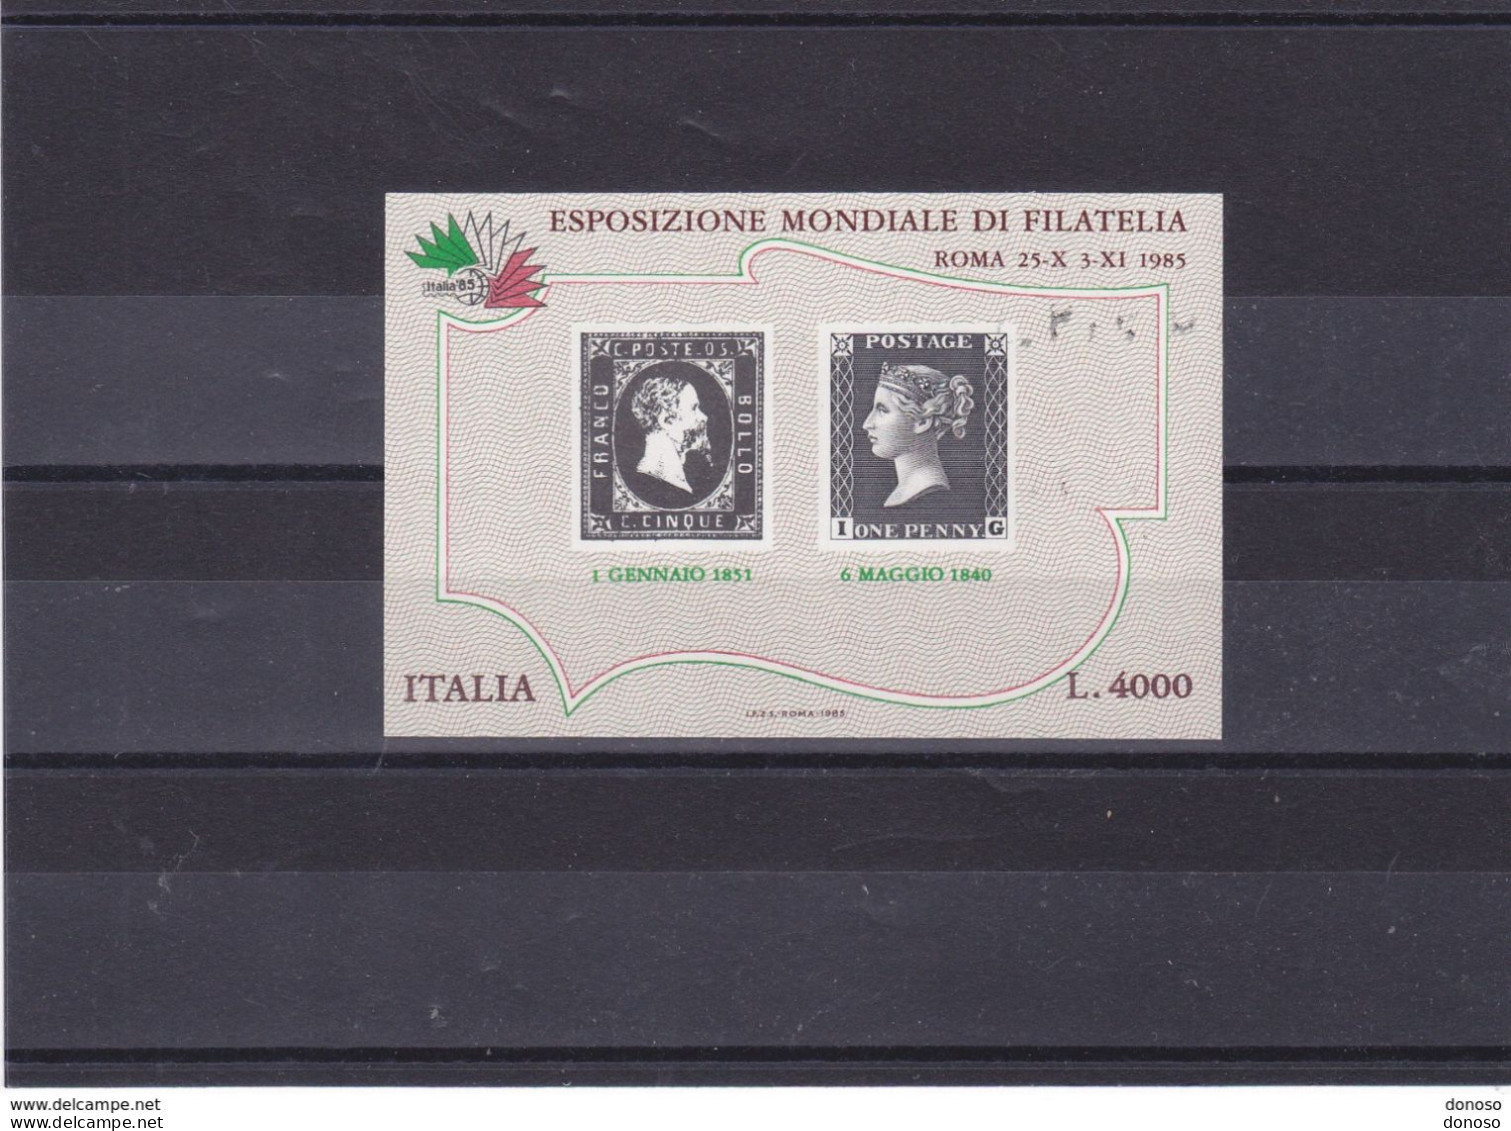 ITALIE 1985 TIMBRES SUR TIMBRES ITALIA 85 Yvert BF 3, Michel Bl 1 NEUF** MNH Cote Yv: 8 Euros - 1981-90: Nieuw/plakker